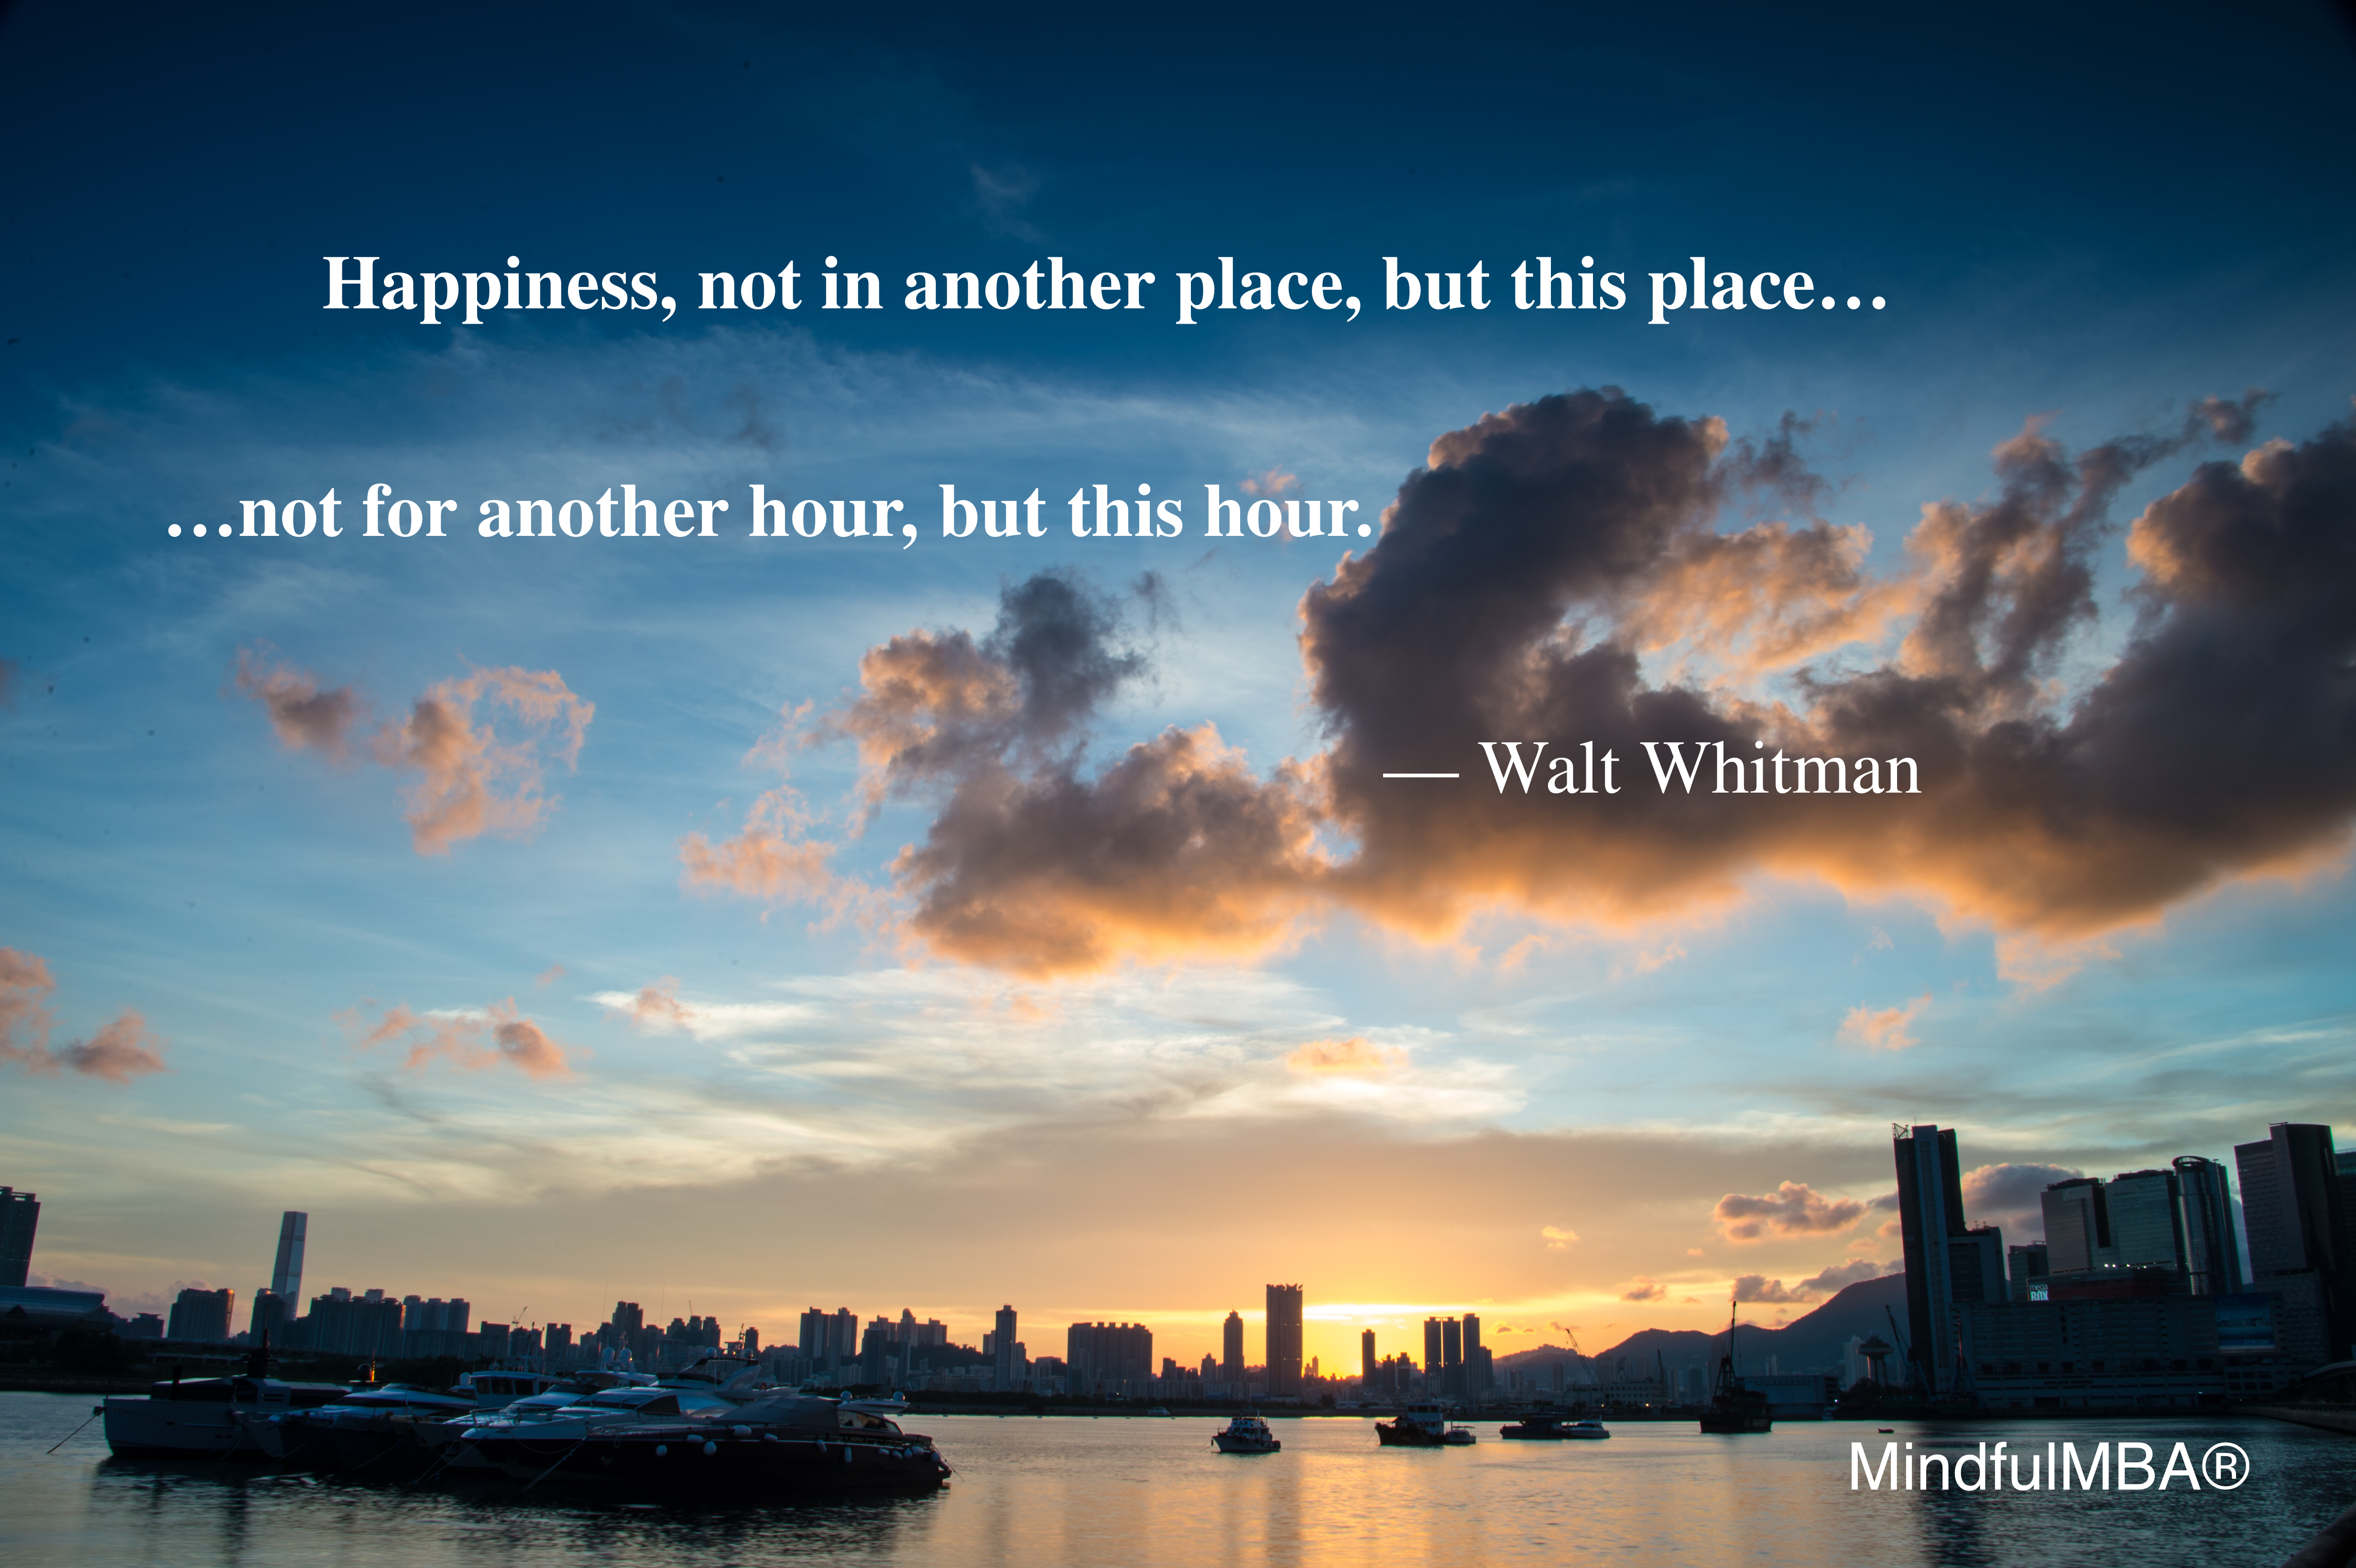 Whitman Happiness Time &amp; Place quote w tag